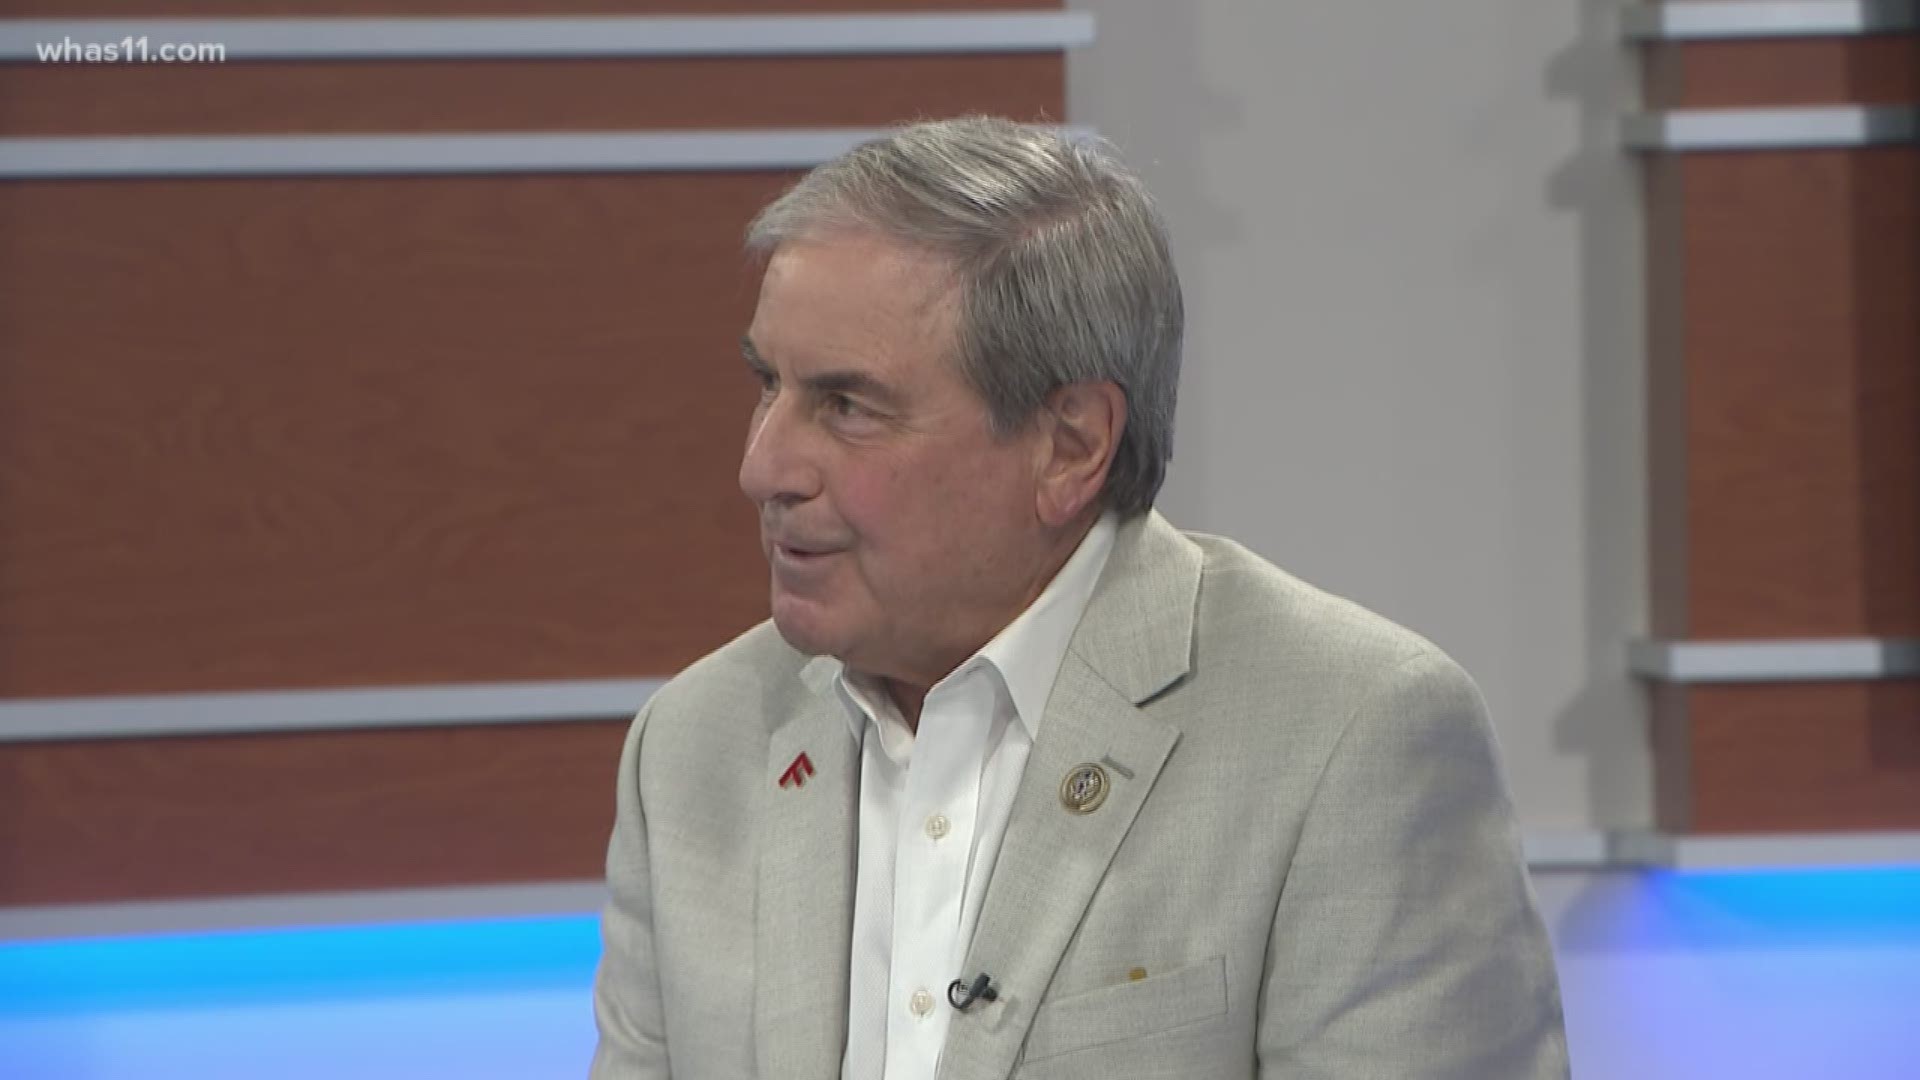 John Yarmuth visits WHAS11 to talk about his plans for Kentucky, and the House, after his re-election.